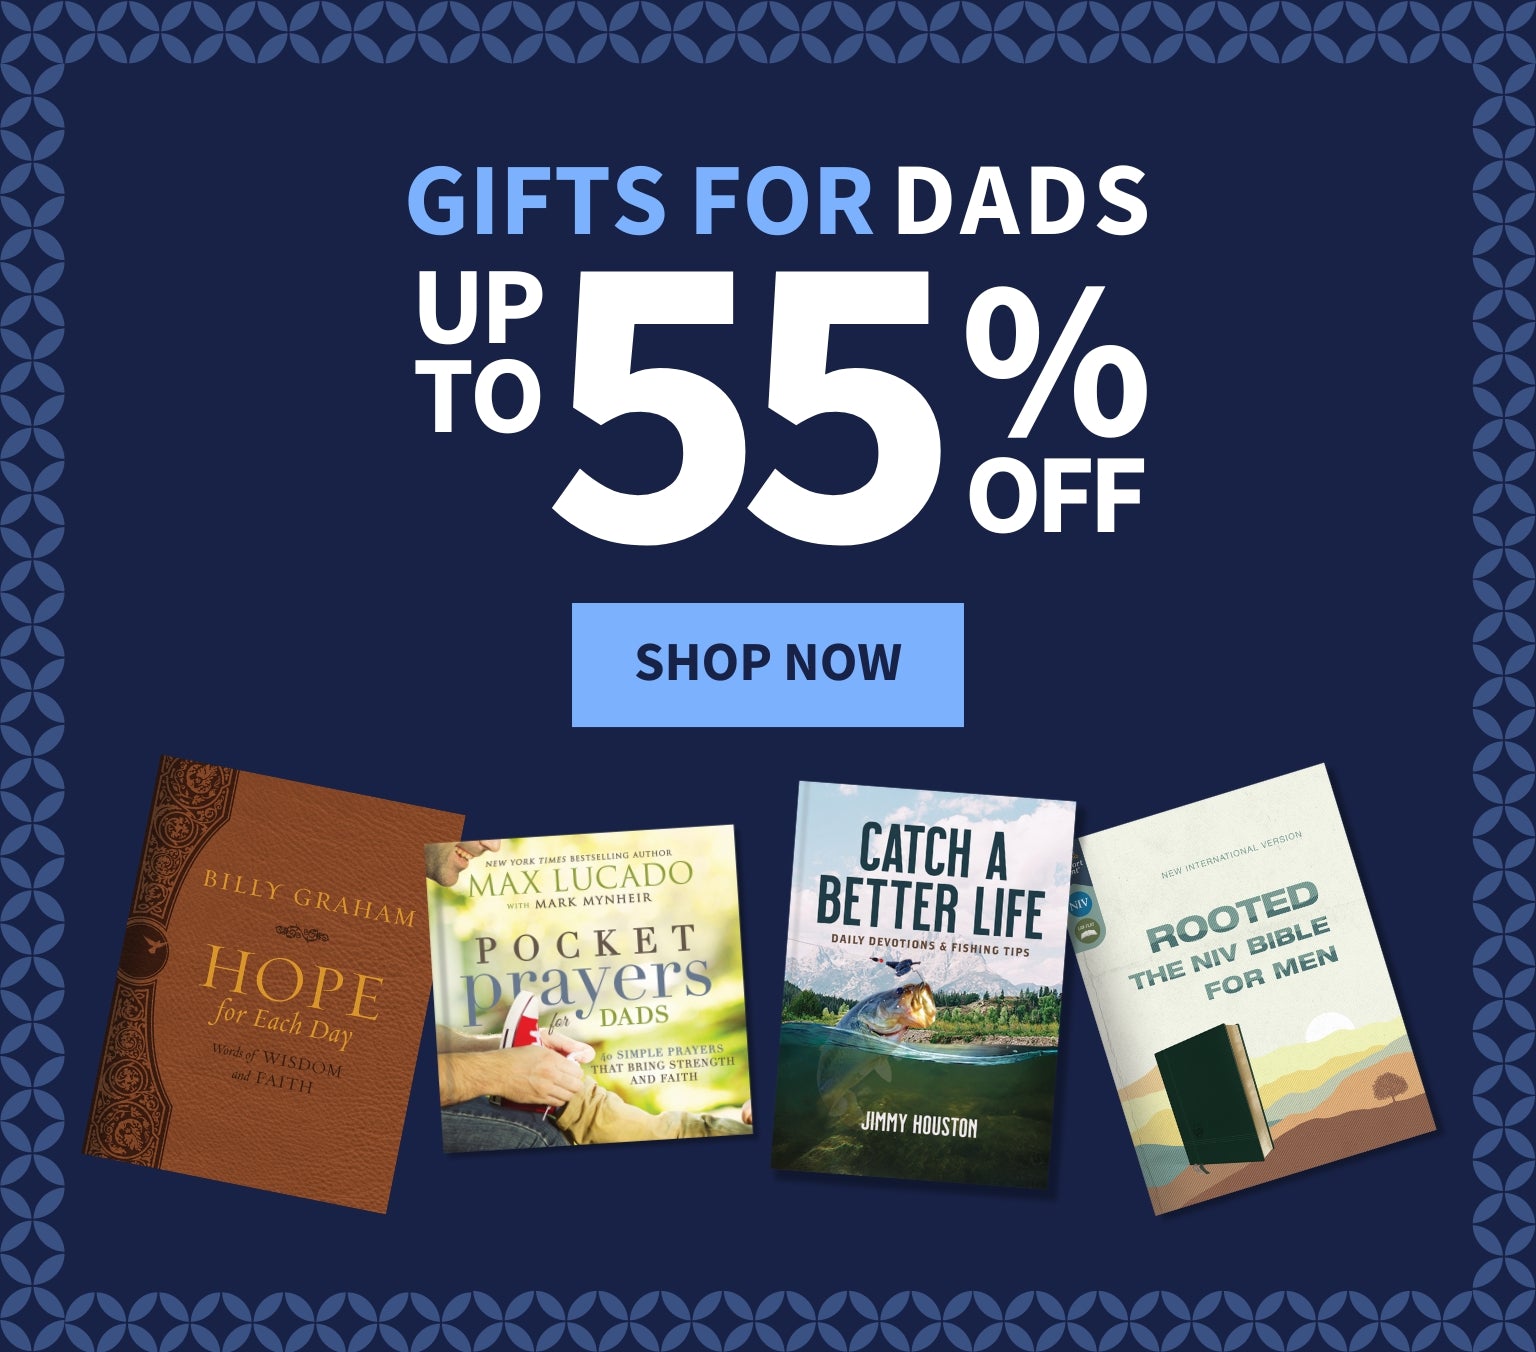 Gifts for Dads, Up to 55% off - Shop Now